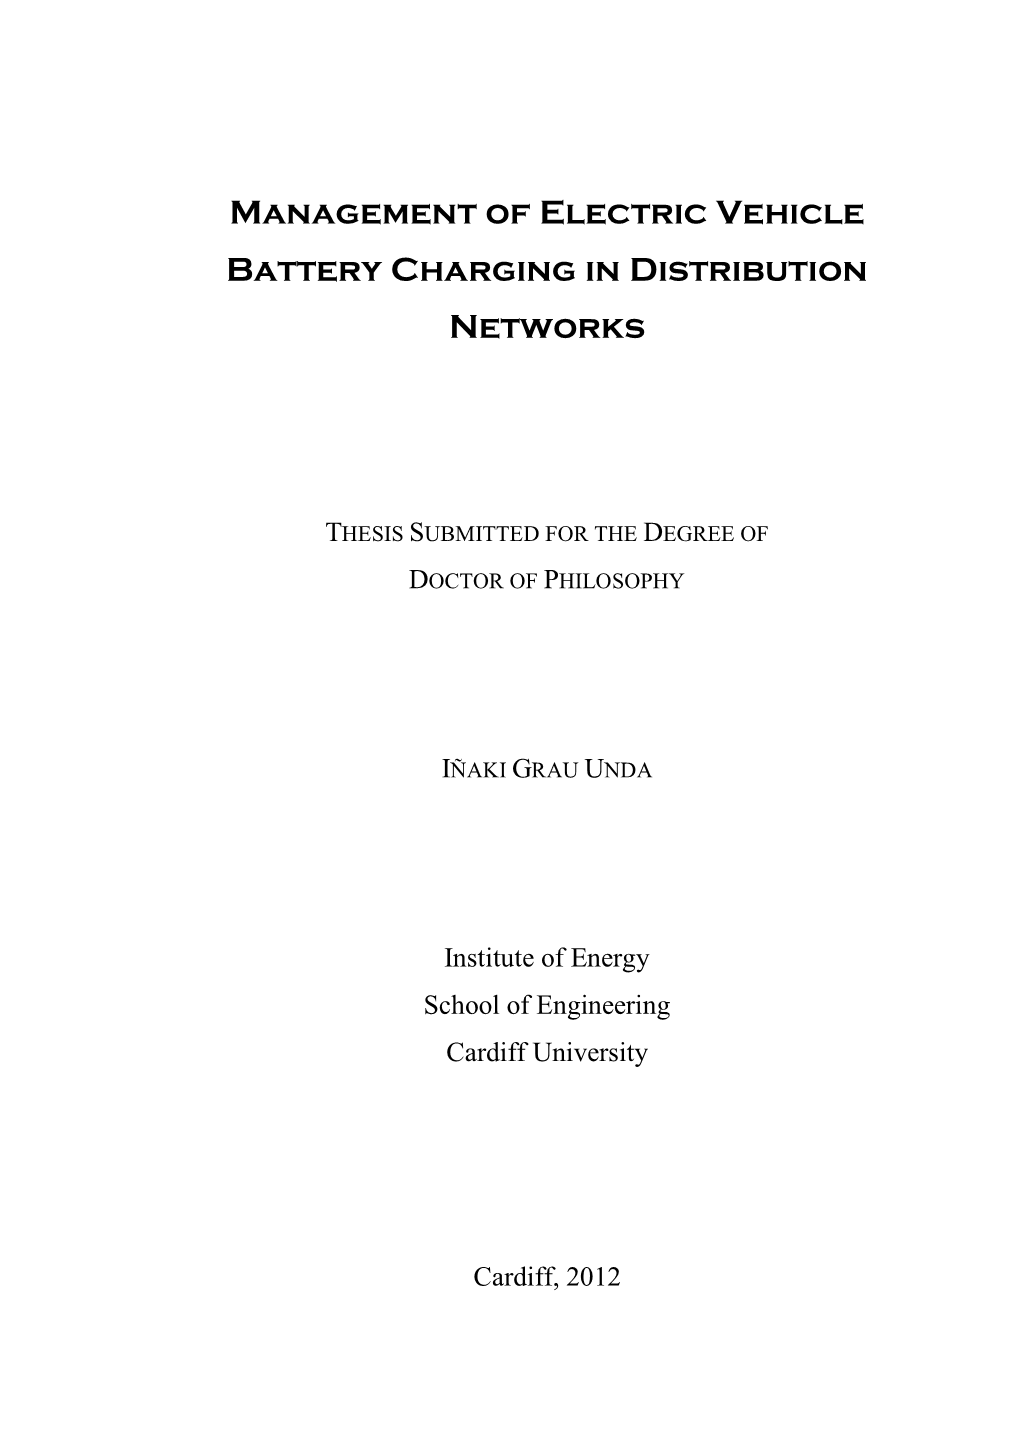 Management of Electric Vehicle Battery Charging in Distribution Networks